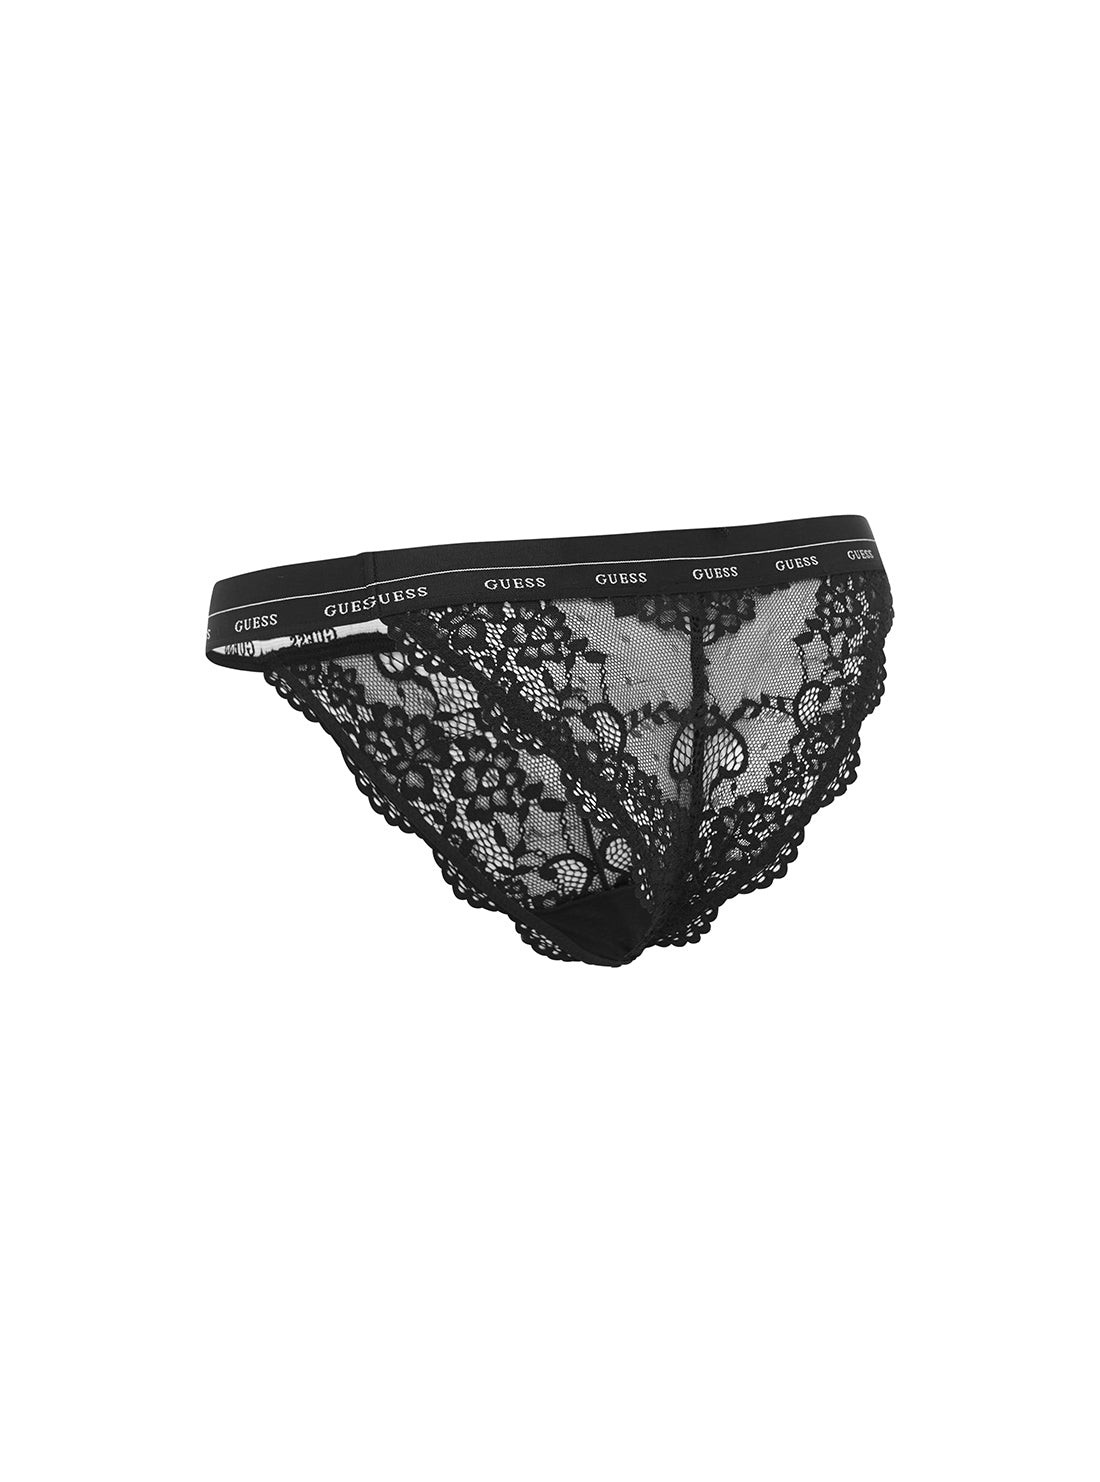 GUESS Womens  Black Brazilian Lace Brief O0BE02PZ01C Ghost Back View